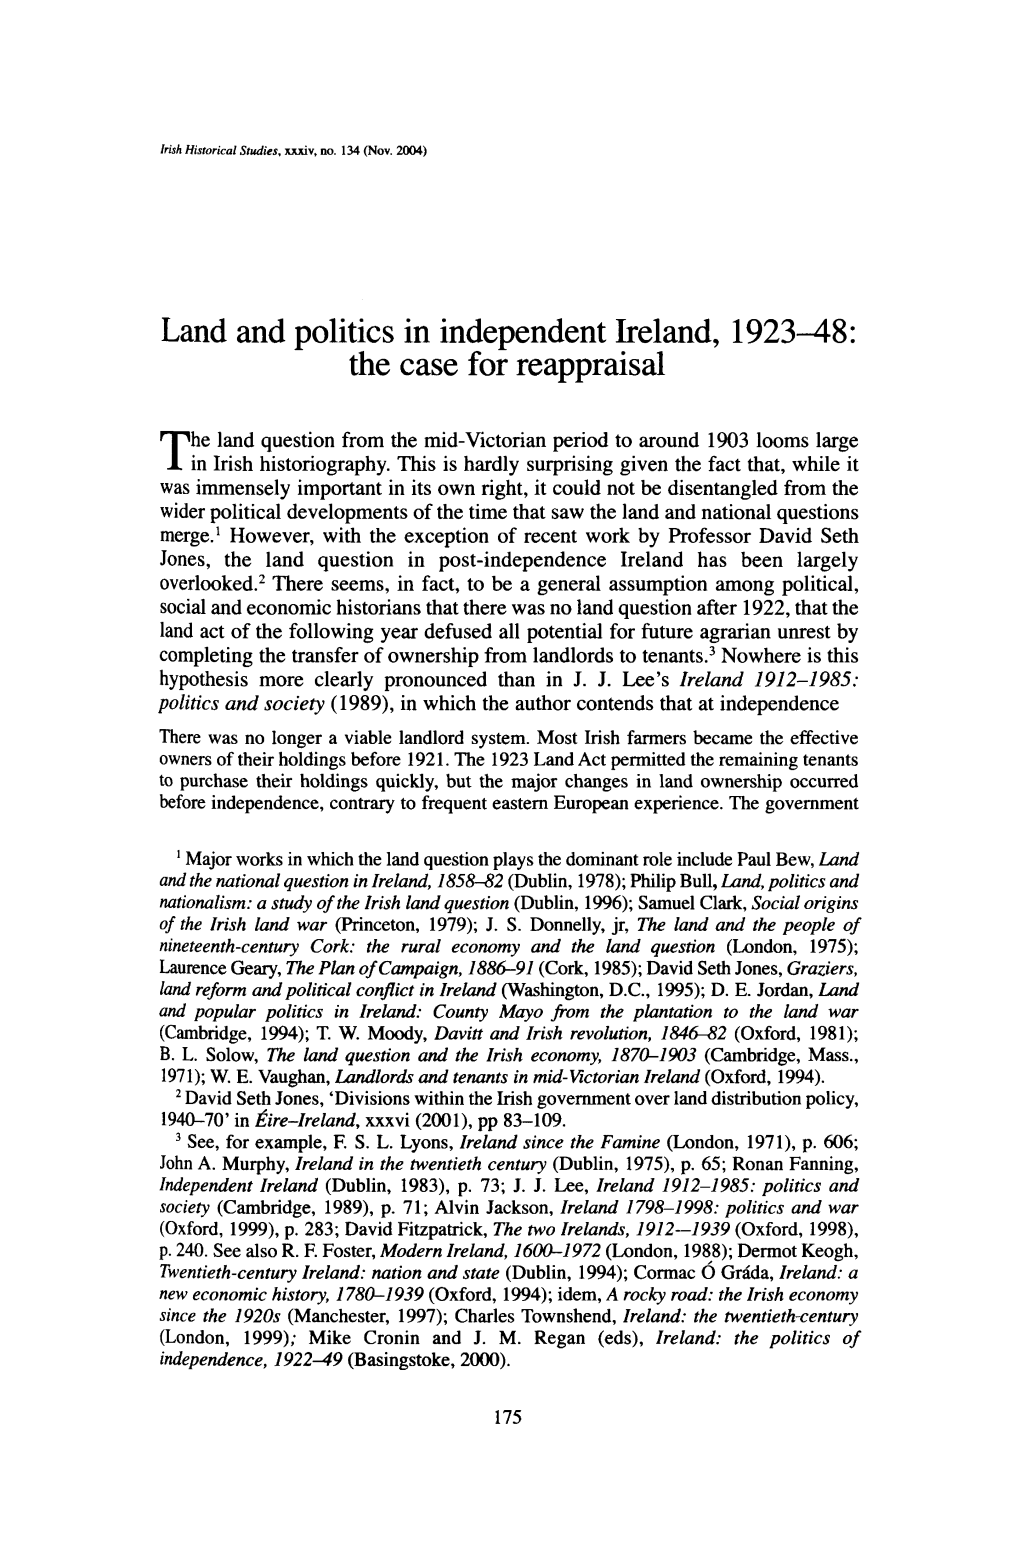 Land and Politics in Independent Ireland, 1923-48